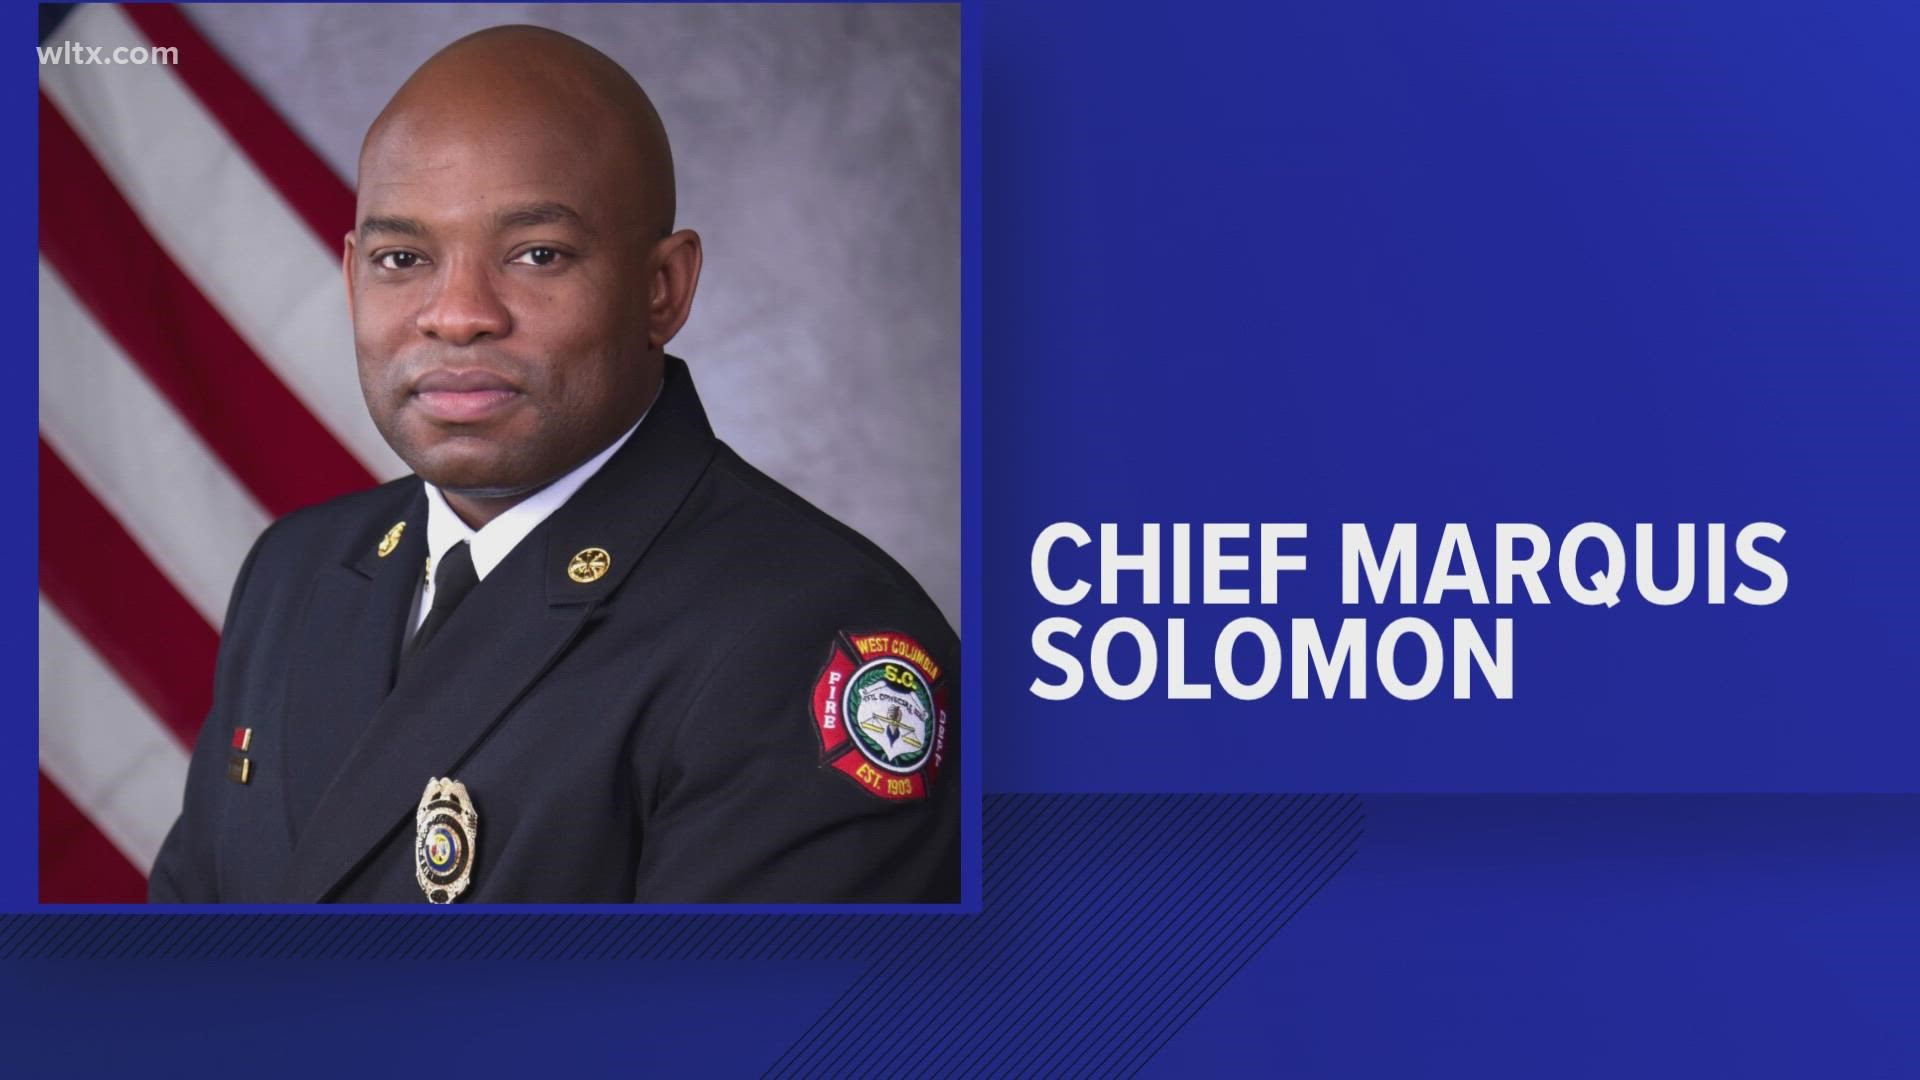 Marquis Solomon a 23-year fire service veteran who's been the second in command of the department  for the past 8 years.